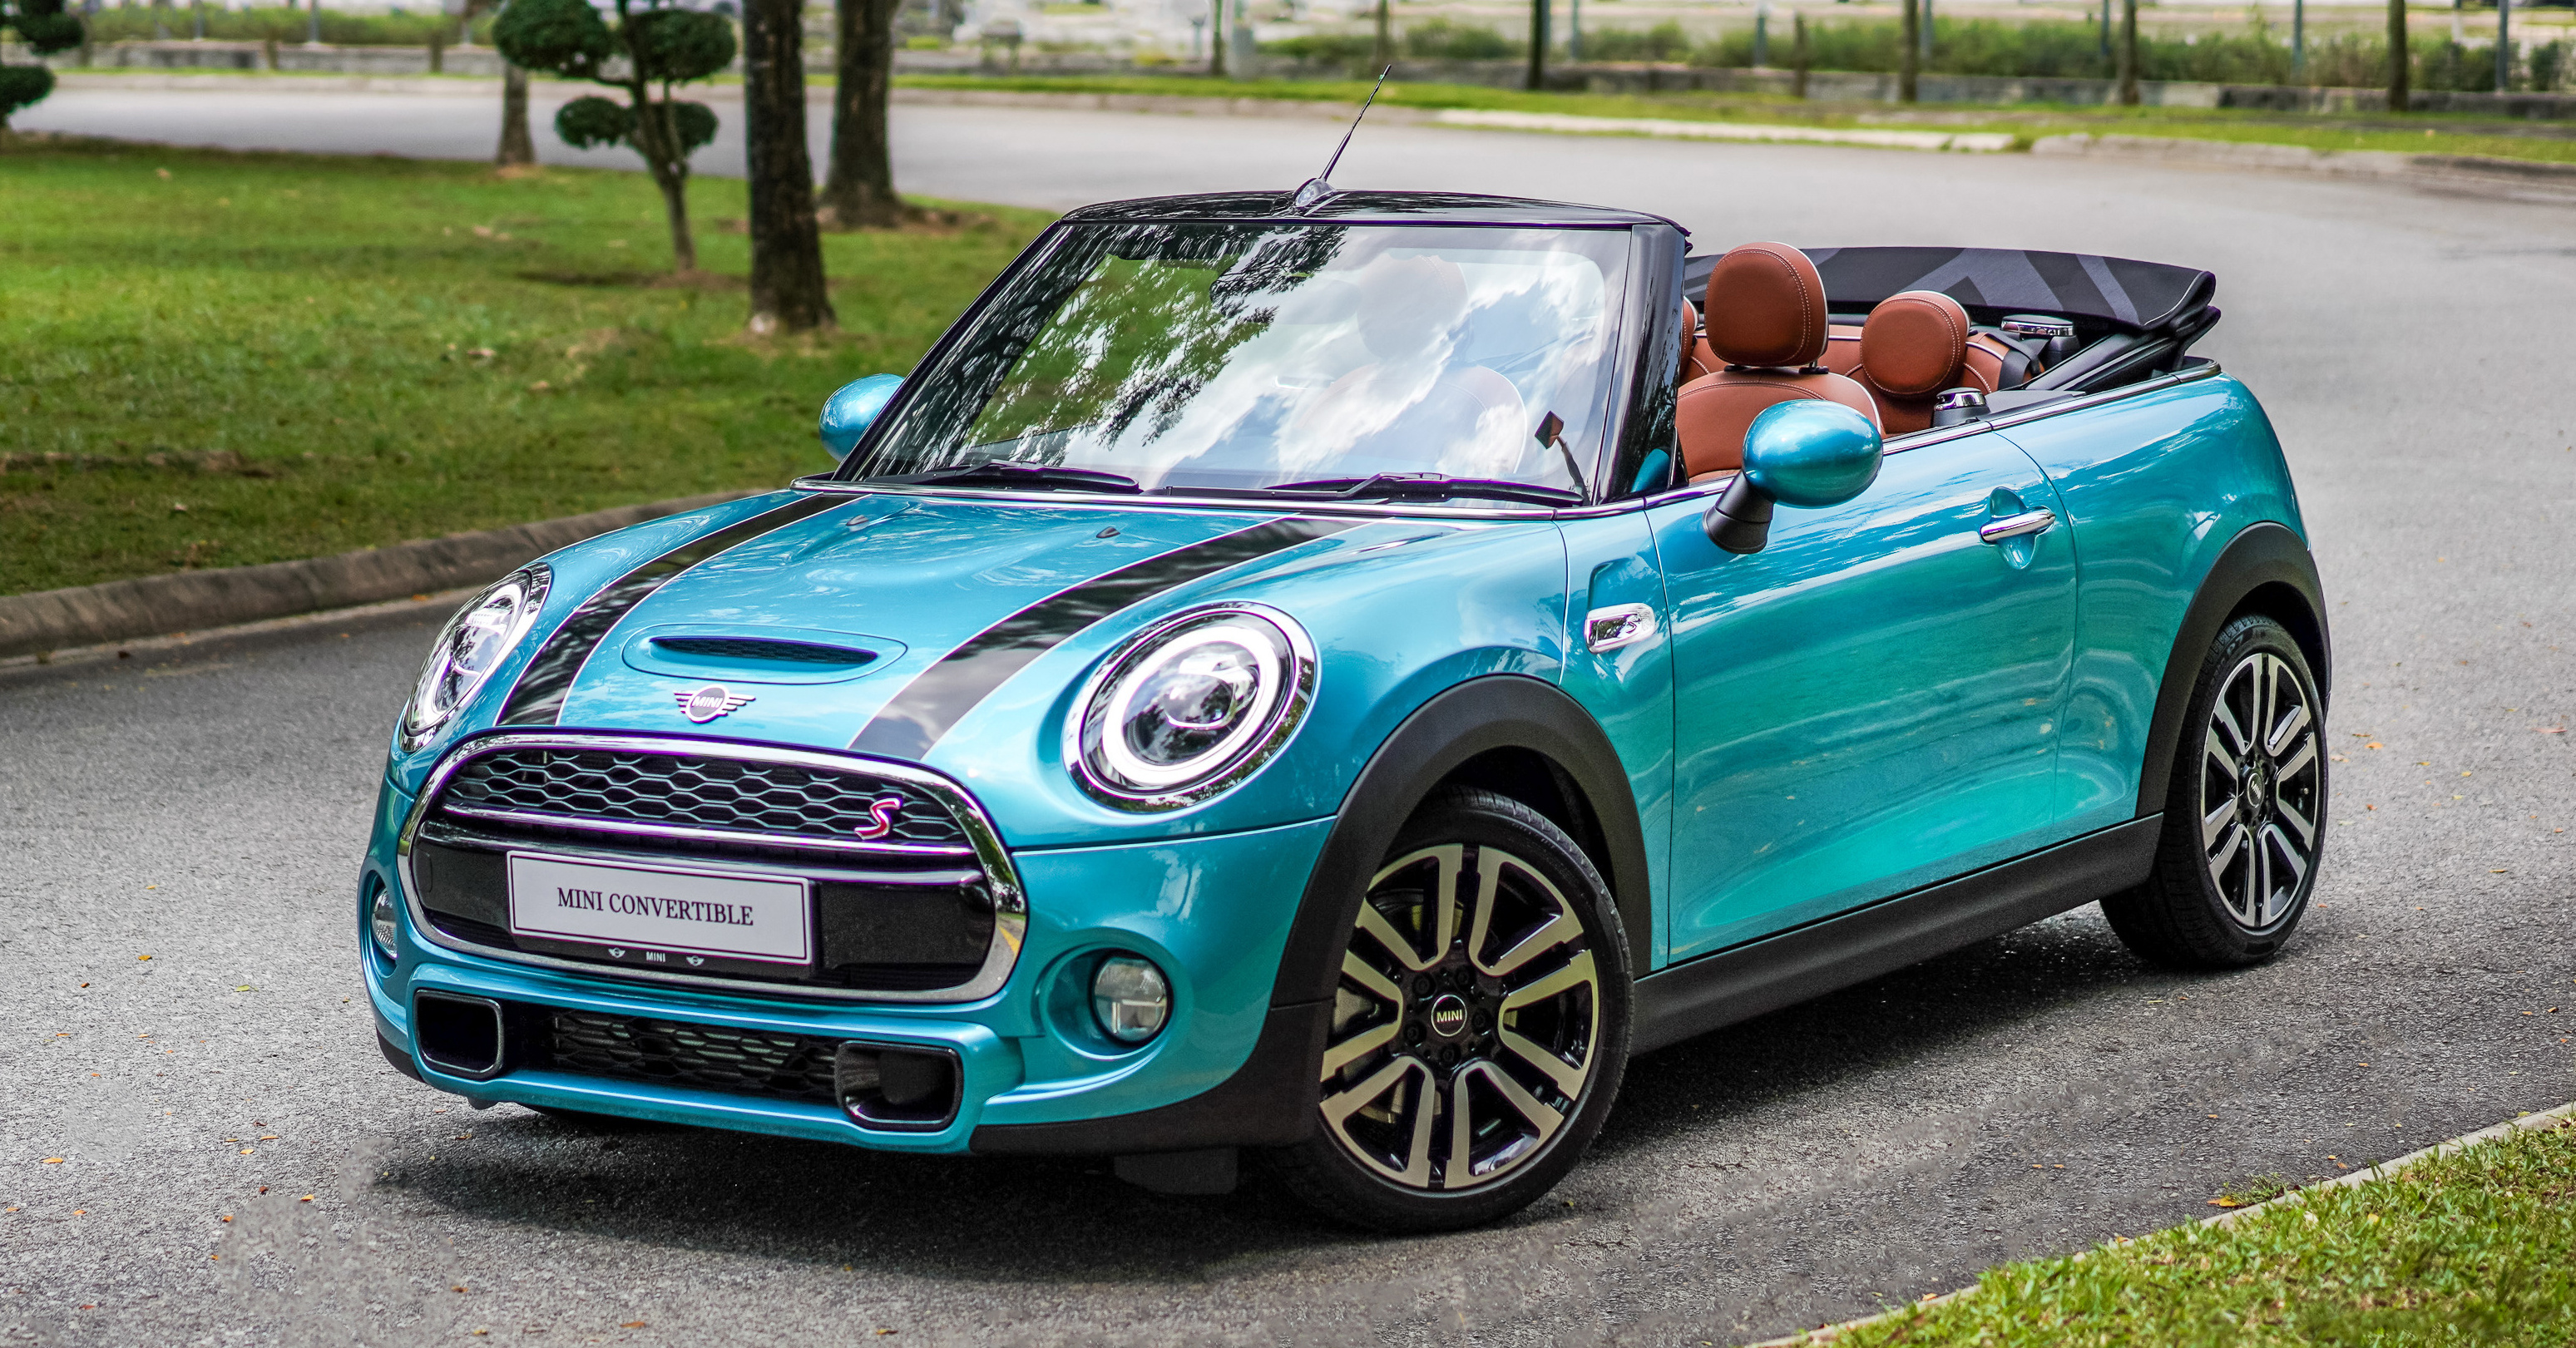 MINI Convertible, Exclusive limited edition, Fun and stylish, Convertible charm, 3100x1630 HD Desktop